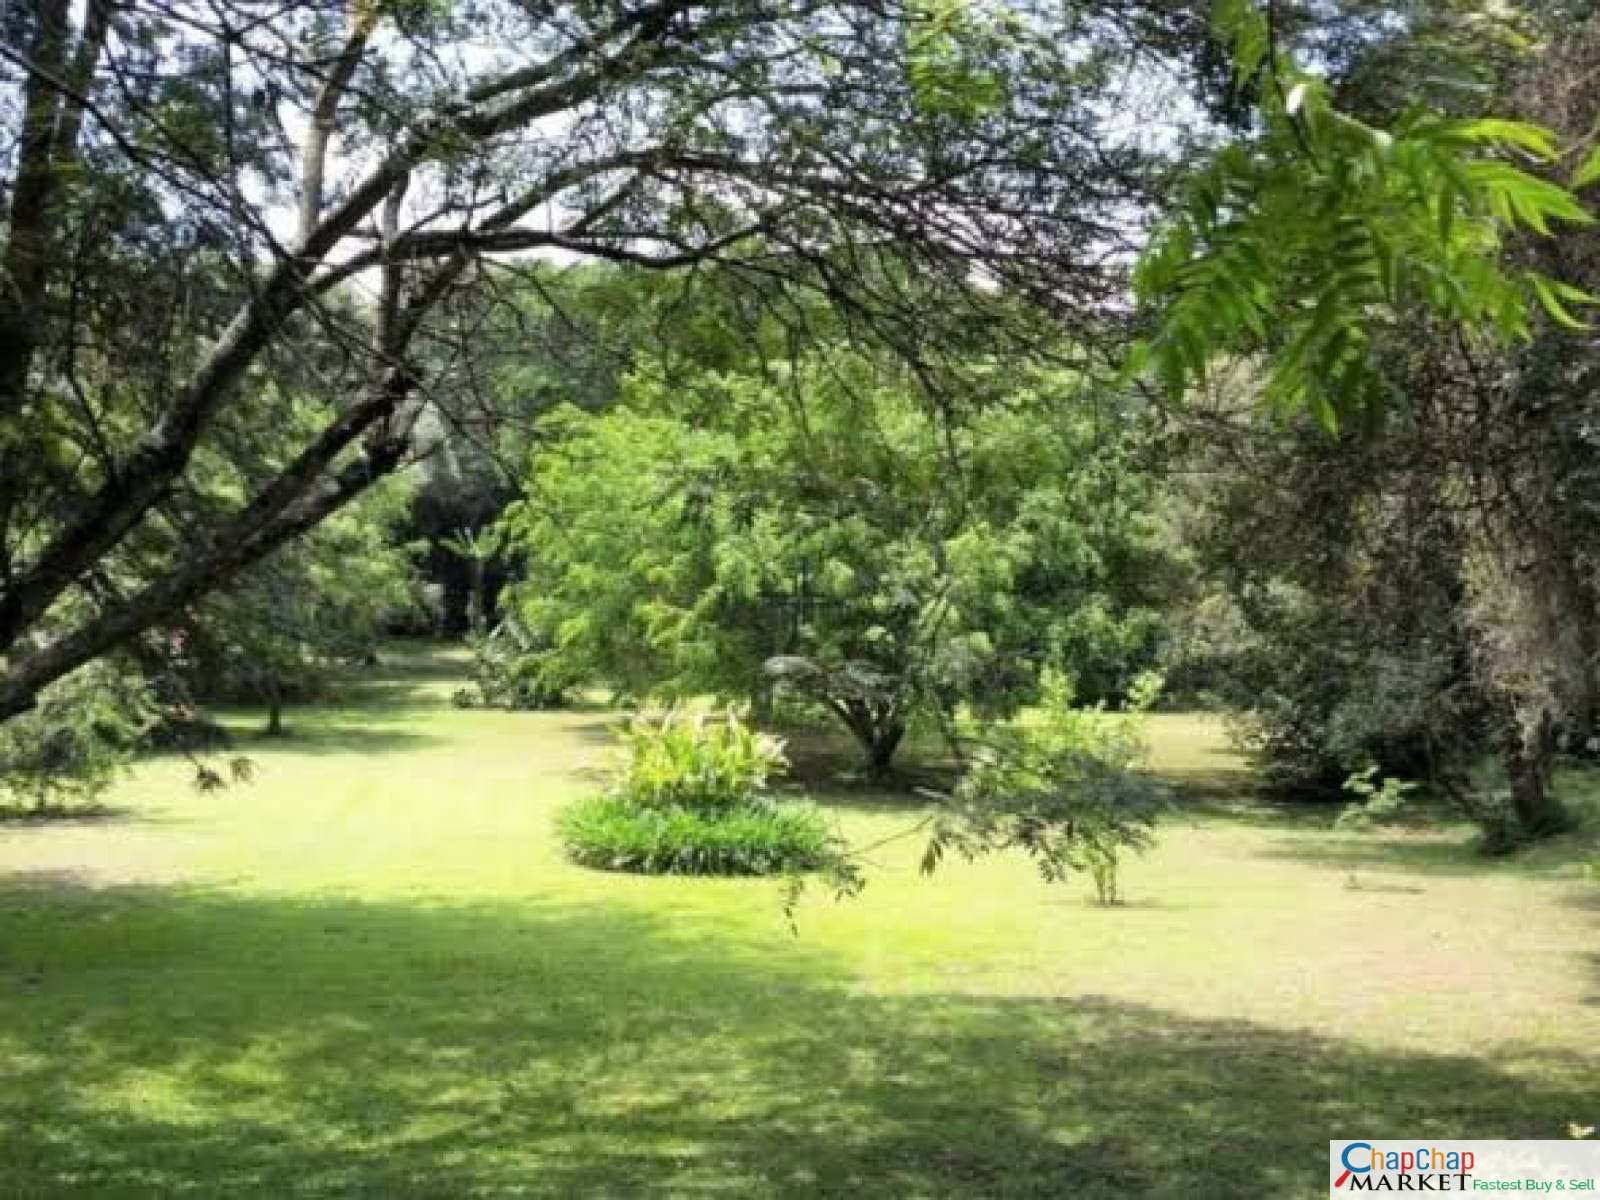 Real Estate-Karen land for sale Kuwinda Road 1/2 acre Ready Title Deed QUICK SALE